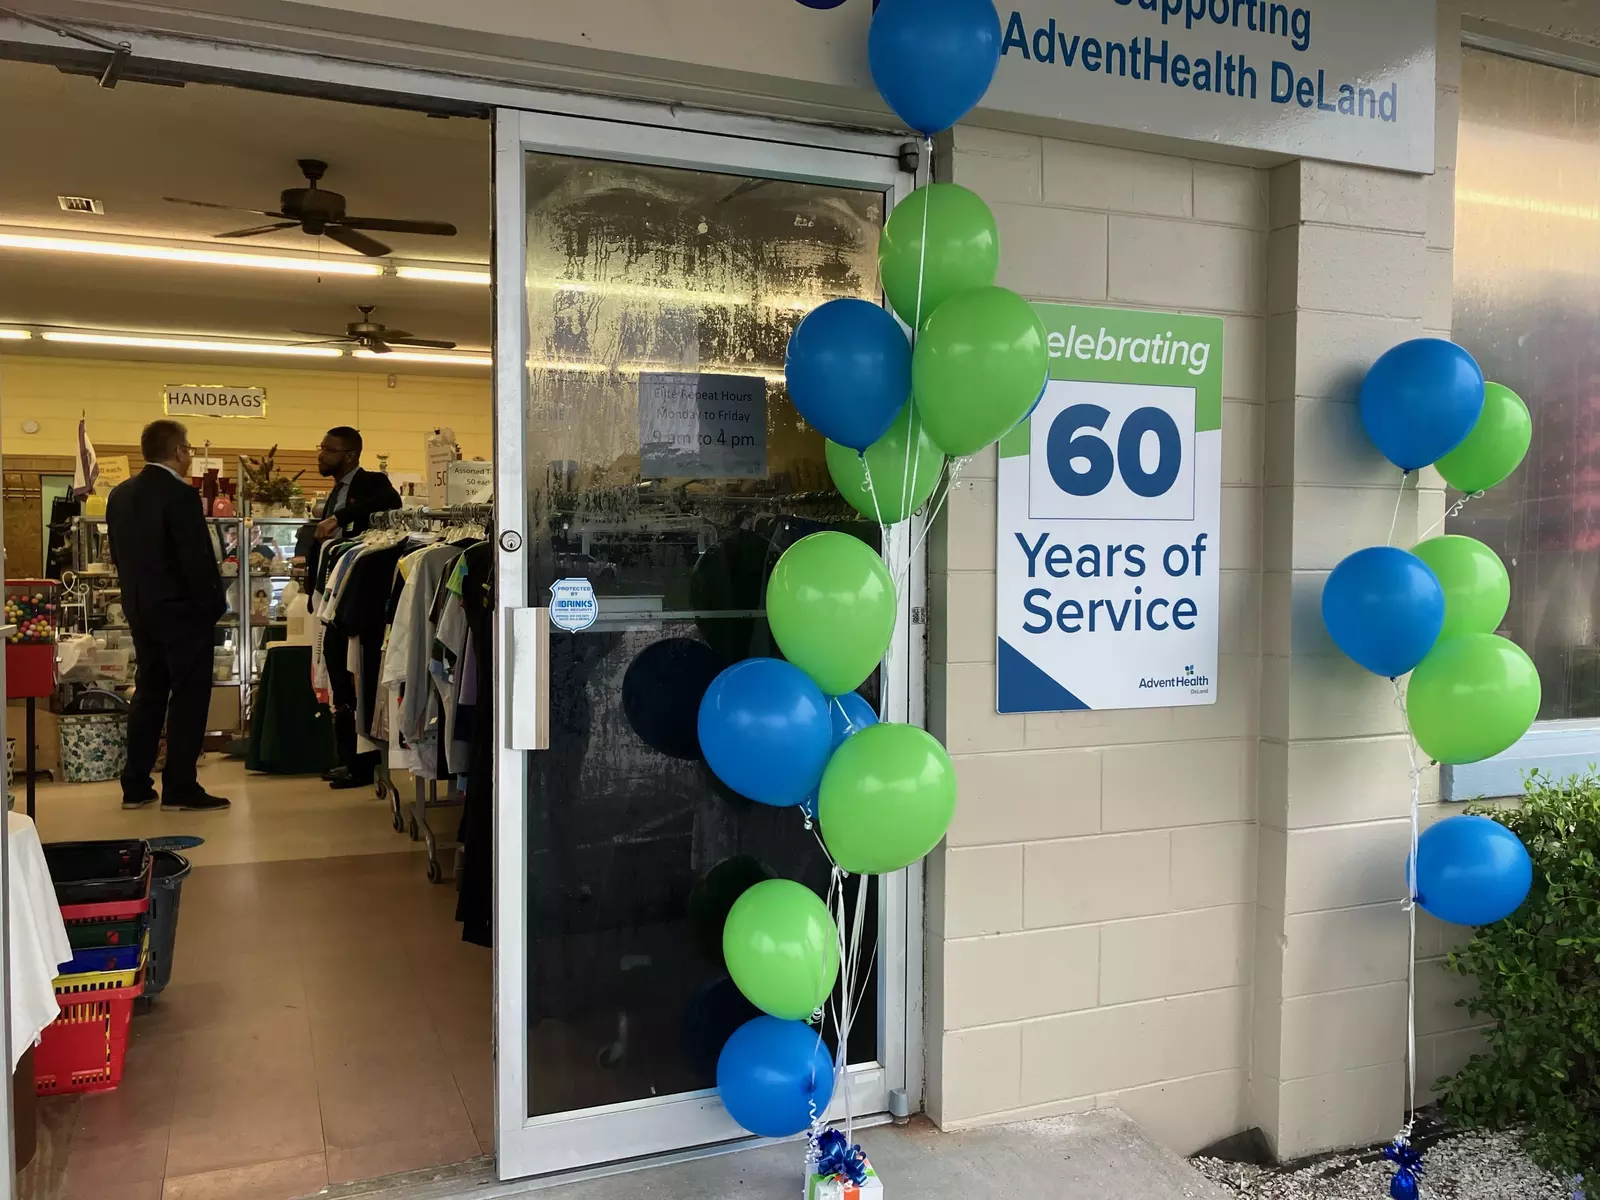 Outside of Elite Repeat Thrift Store features a 60 years of service sign